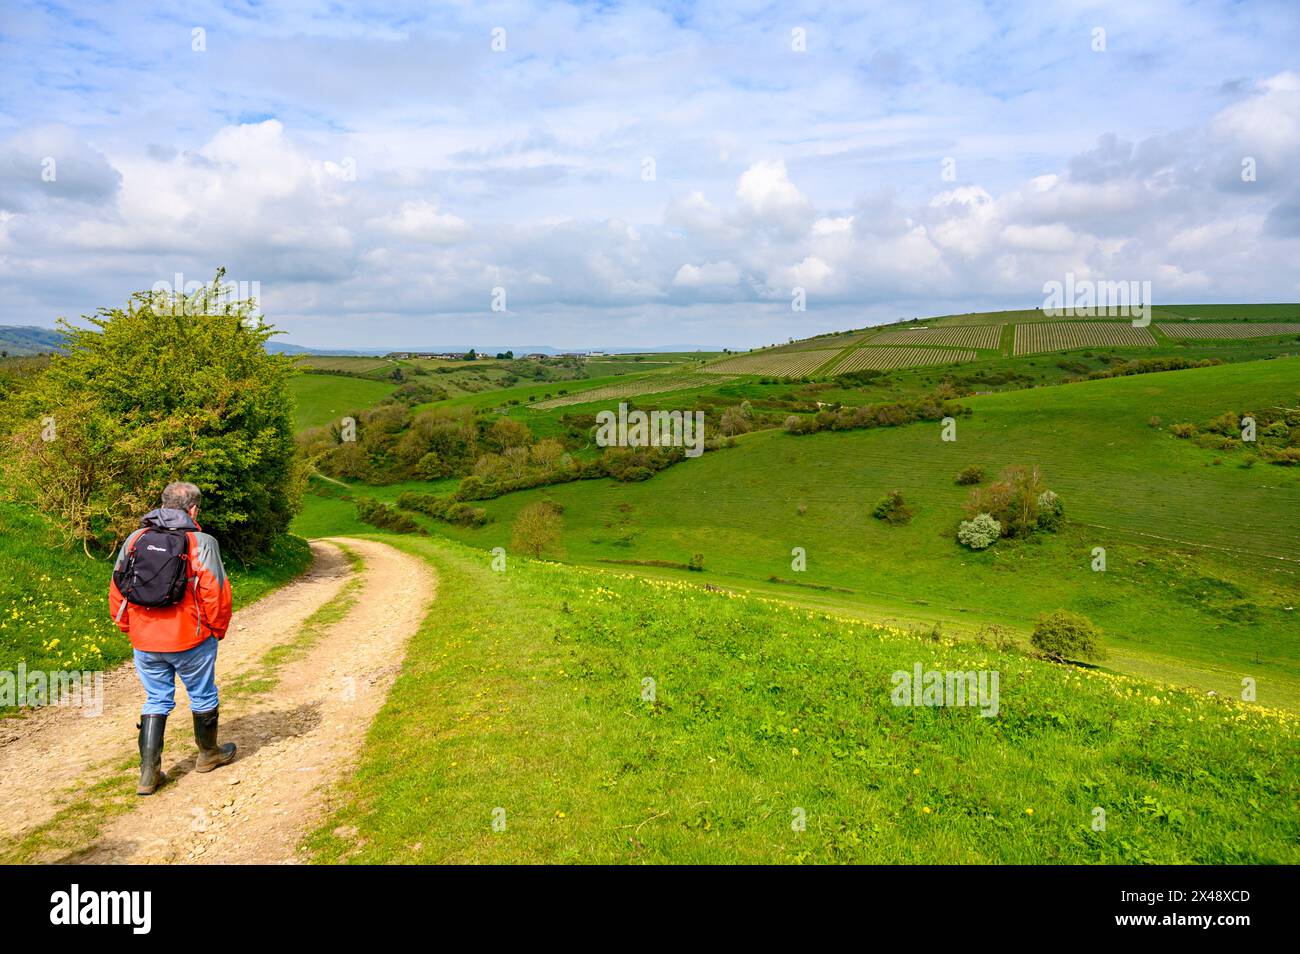 A man walks on a gravel road with views over green valley, wooded hills and farmland in South Downs National Park near Amberley, West Sussex, England. Stock Photo